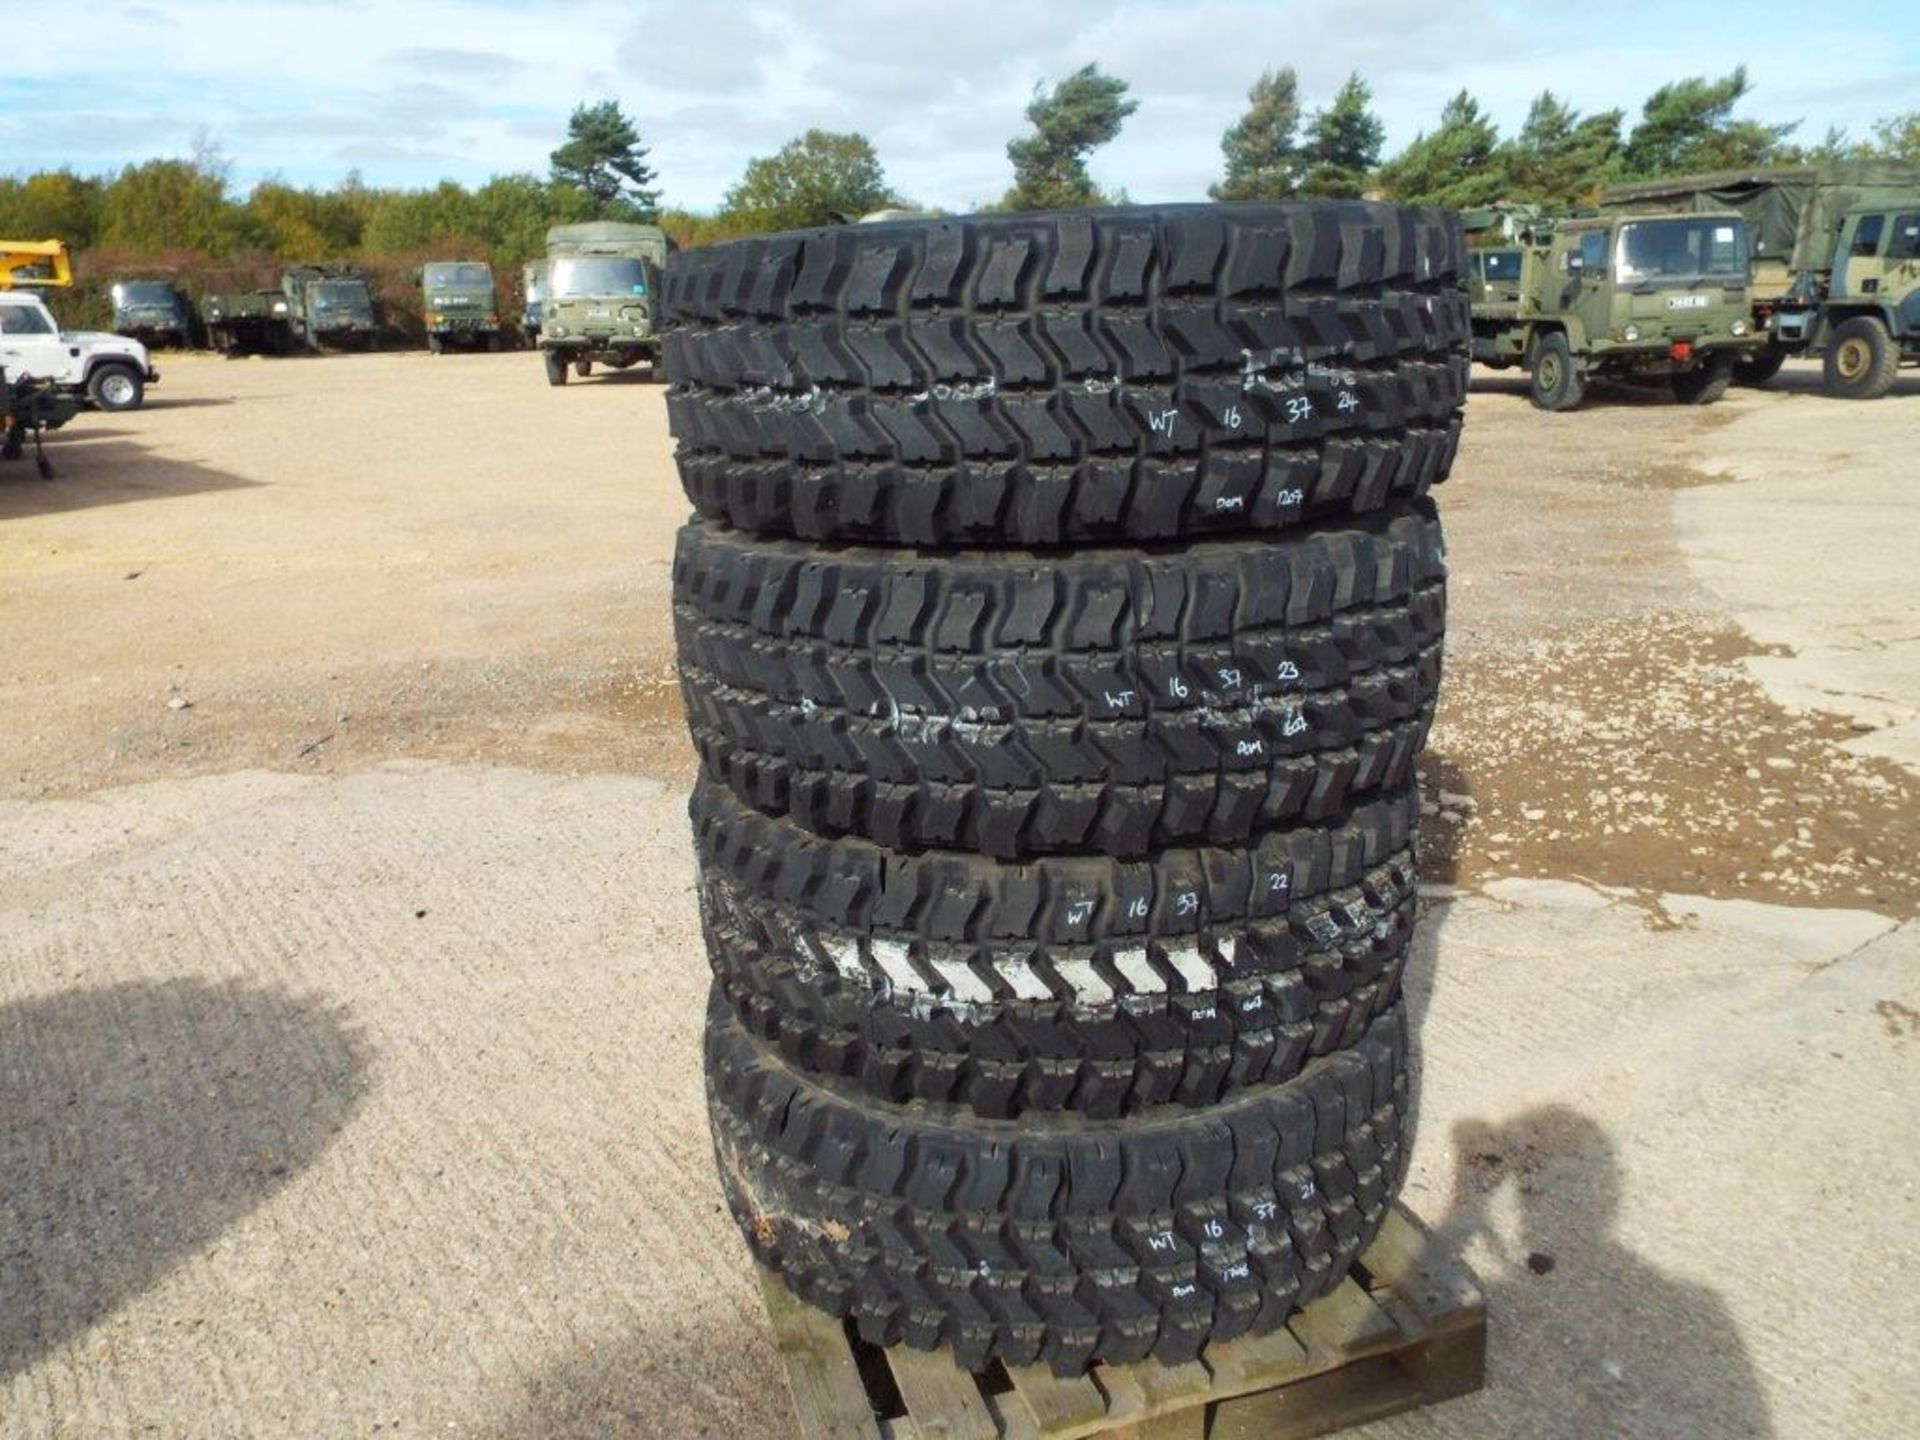 4 x Goodyear MV/T 395/85 R20 Tyres with 10 Stud Rims